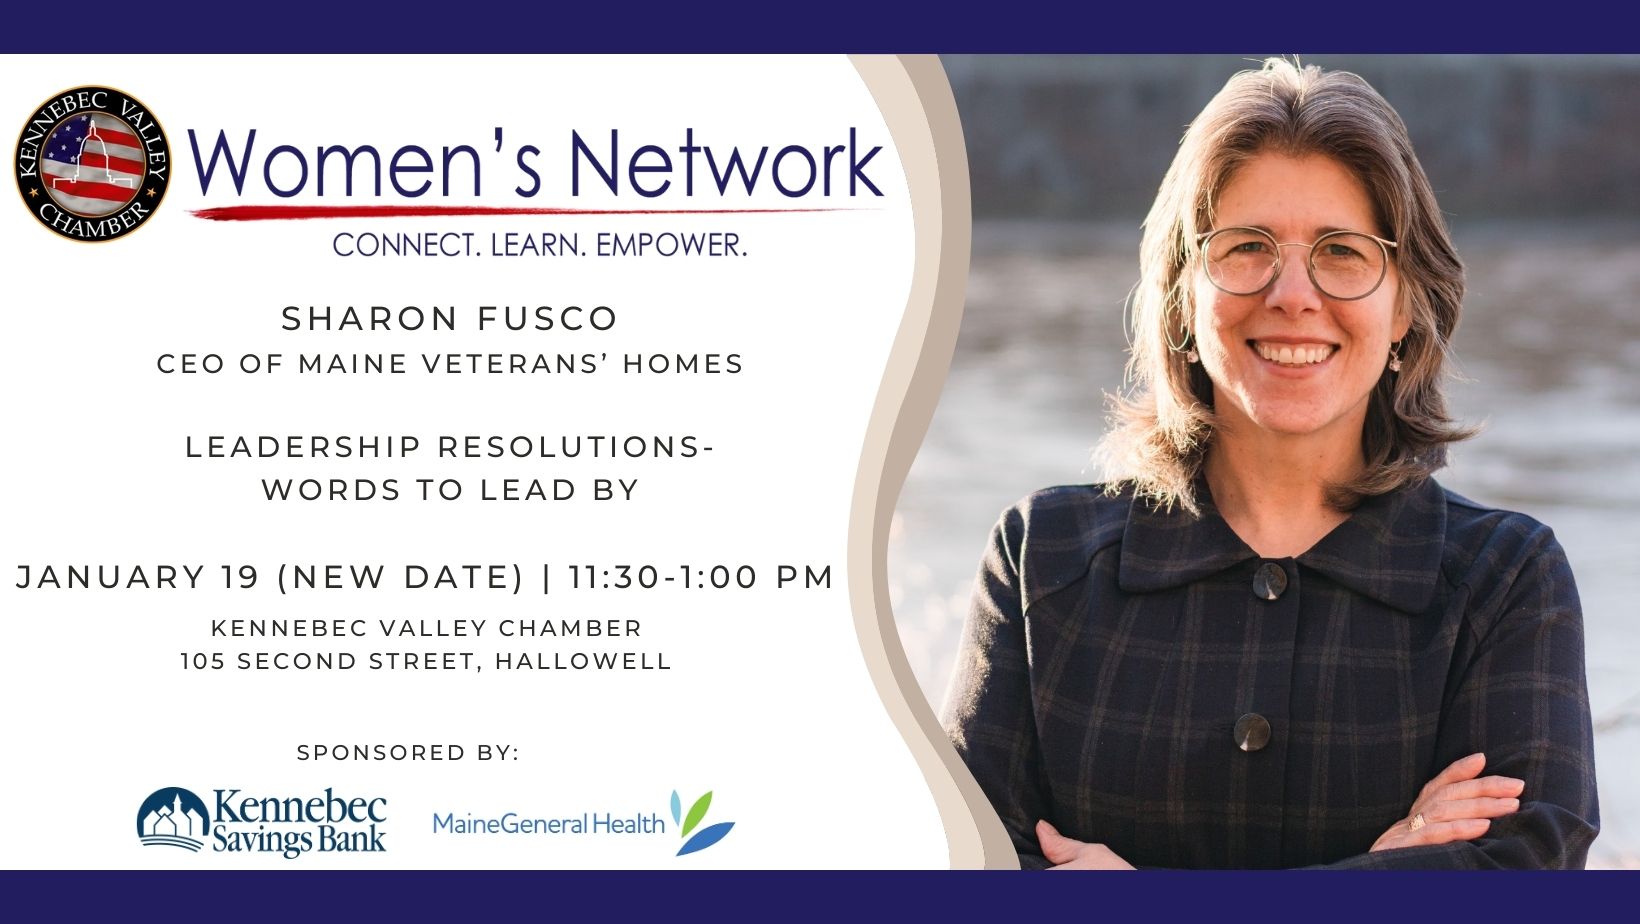 Women's Network Luncheon with Sharon Fusco - CEO of Maine Veterans' Homes - Leadership Resolutions - Words to Lead By - January 10 - 11:30-1:00PM - Kennebec Valley Chamber, 105 Second Street, Hallowell. Sponsored by Kennebec Savings Bank & MaineGeneral Health